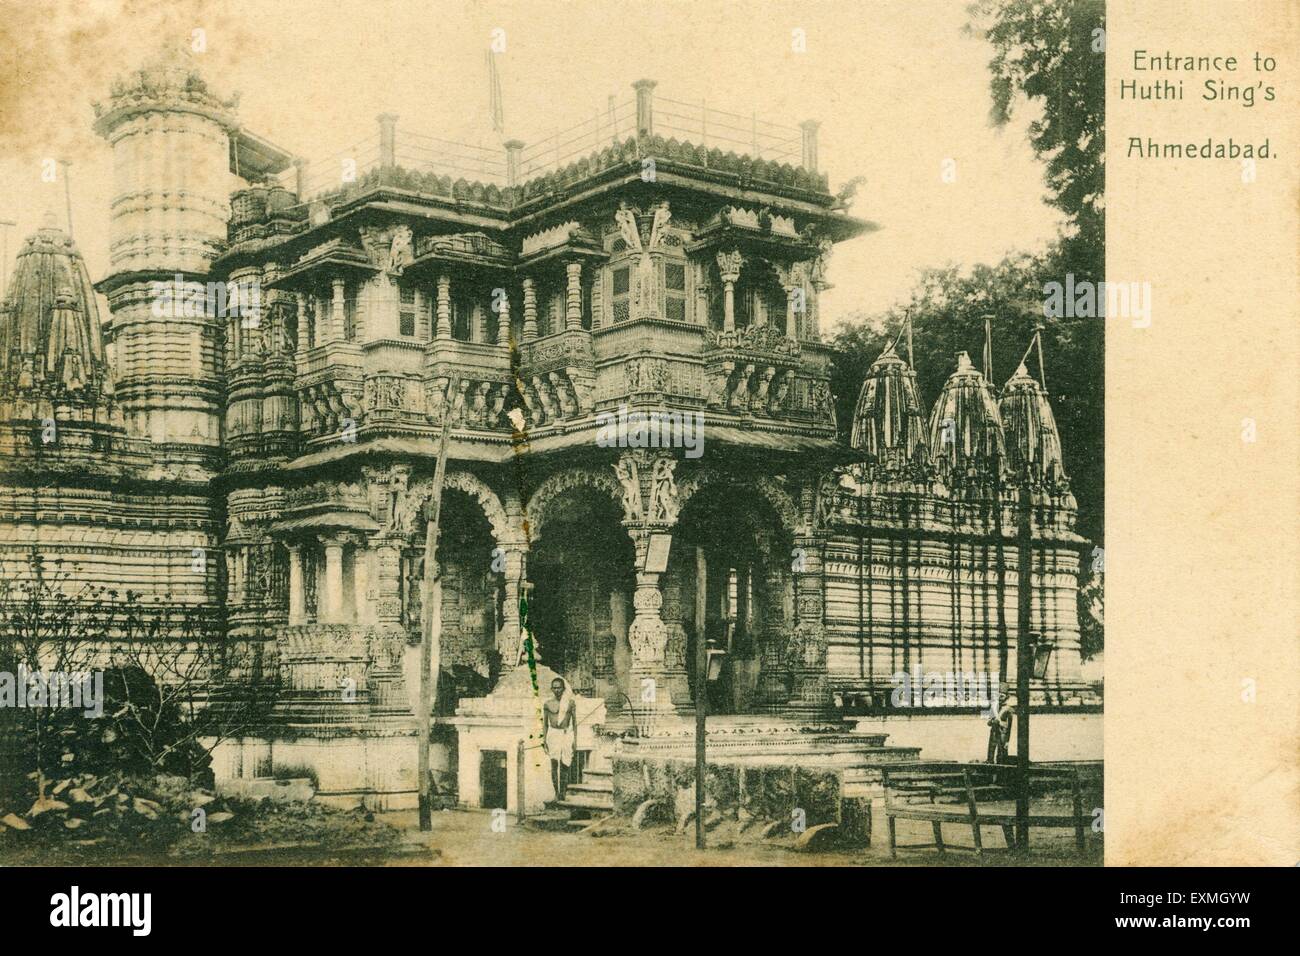 Huthi Sings temple, Hutheesing Jain Temple, Hutheesing Temple, Jain temple, Ahmedabad, Amdavad, Gujarat, India, old vintage 1900s picture Stock Photo